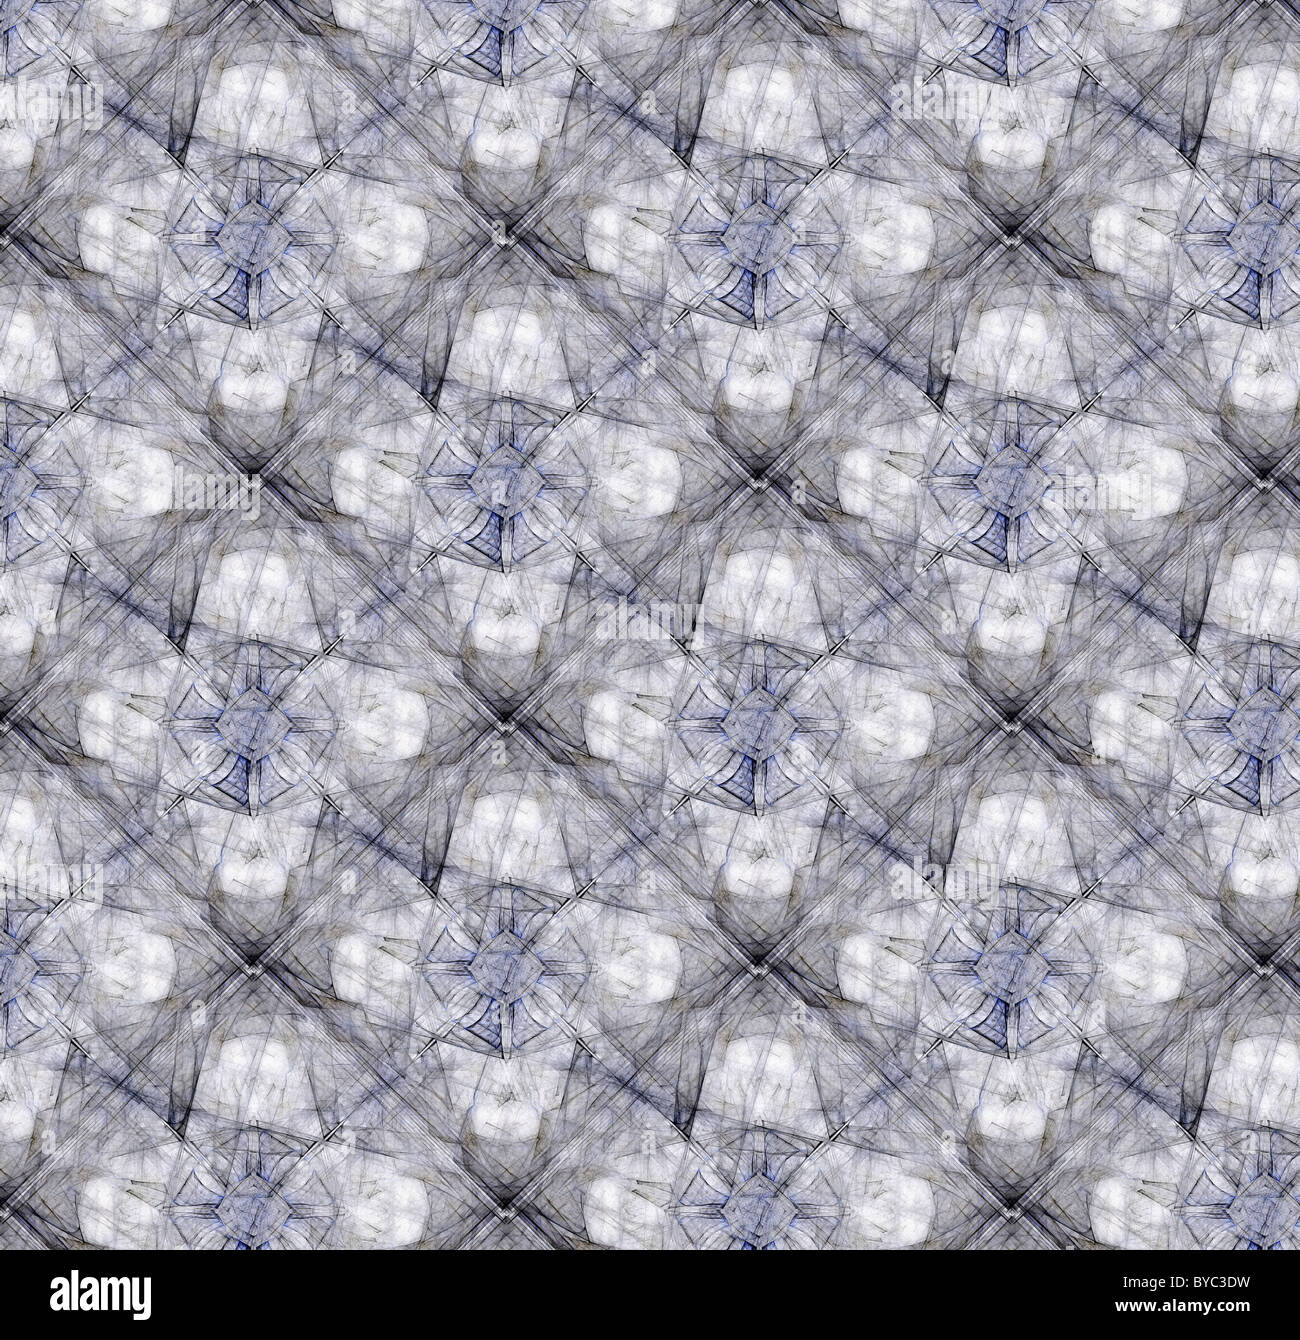 A gray and blue transparent seamless texture made from complex square fractal tiles Stock Photo